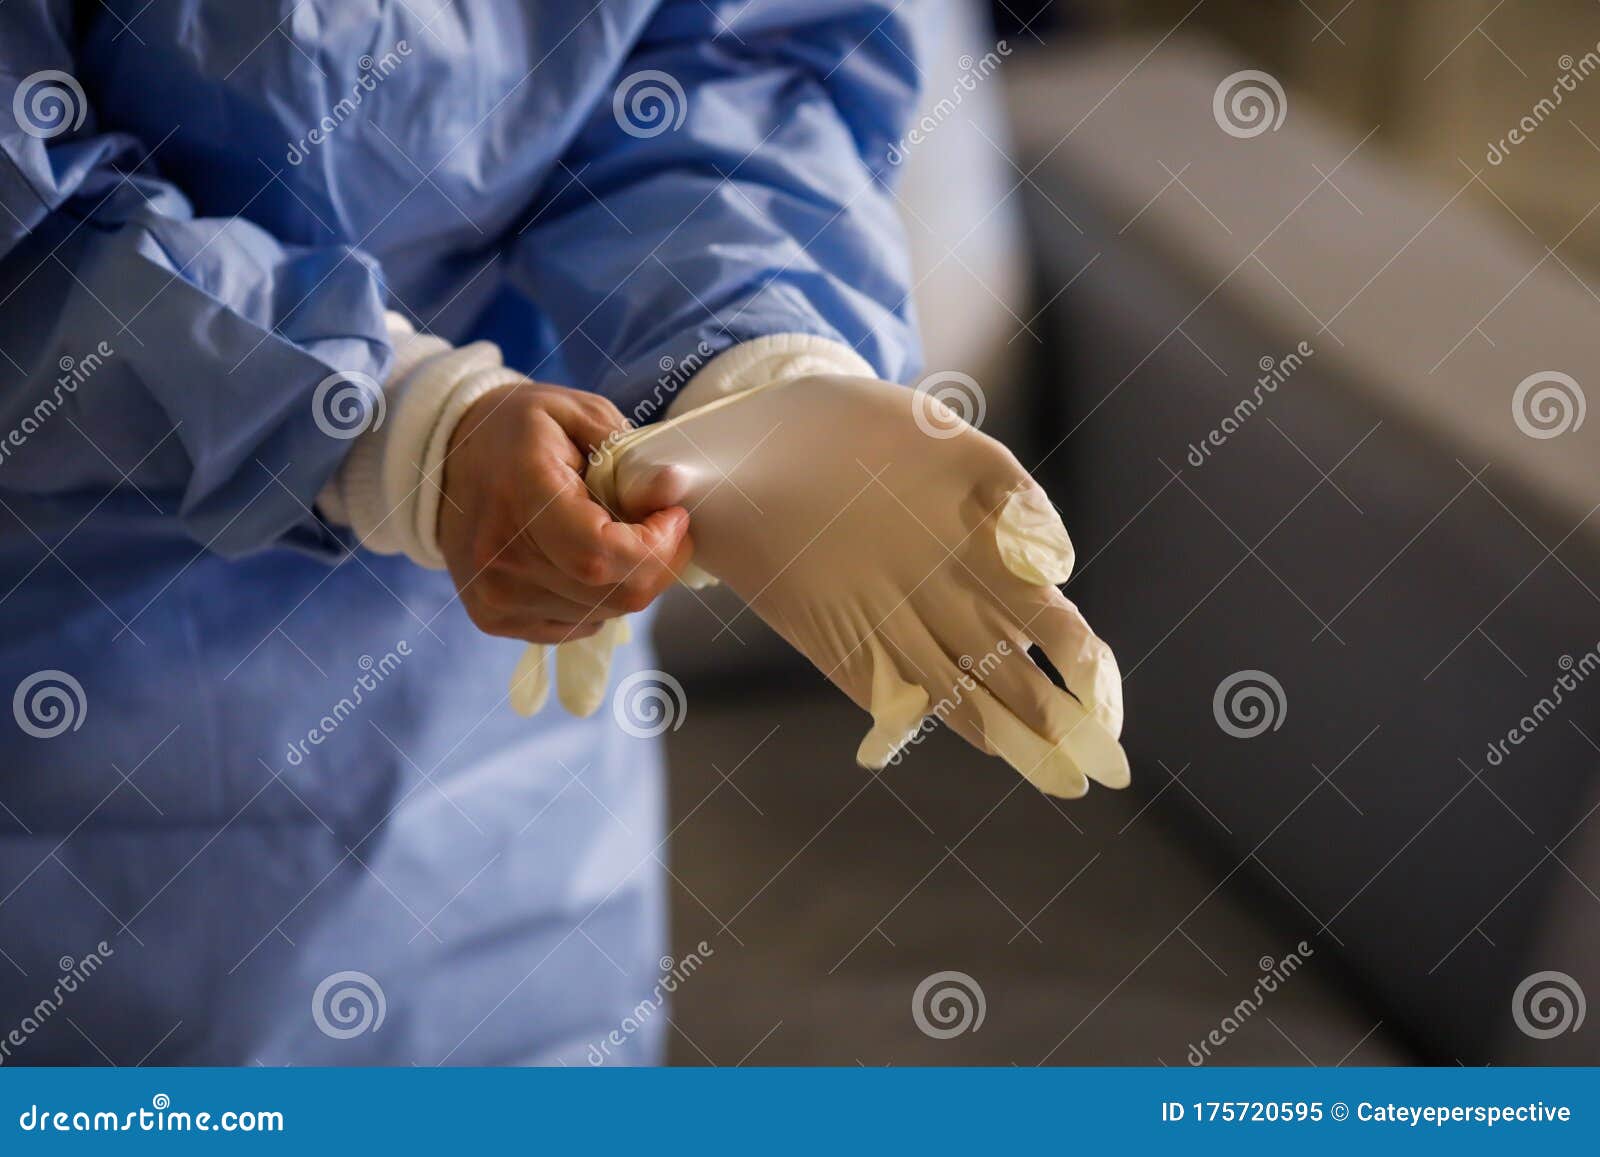 Details with the Hands of a Medic Using Surgical Gloves Stock Image ...